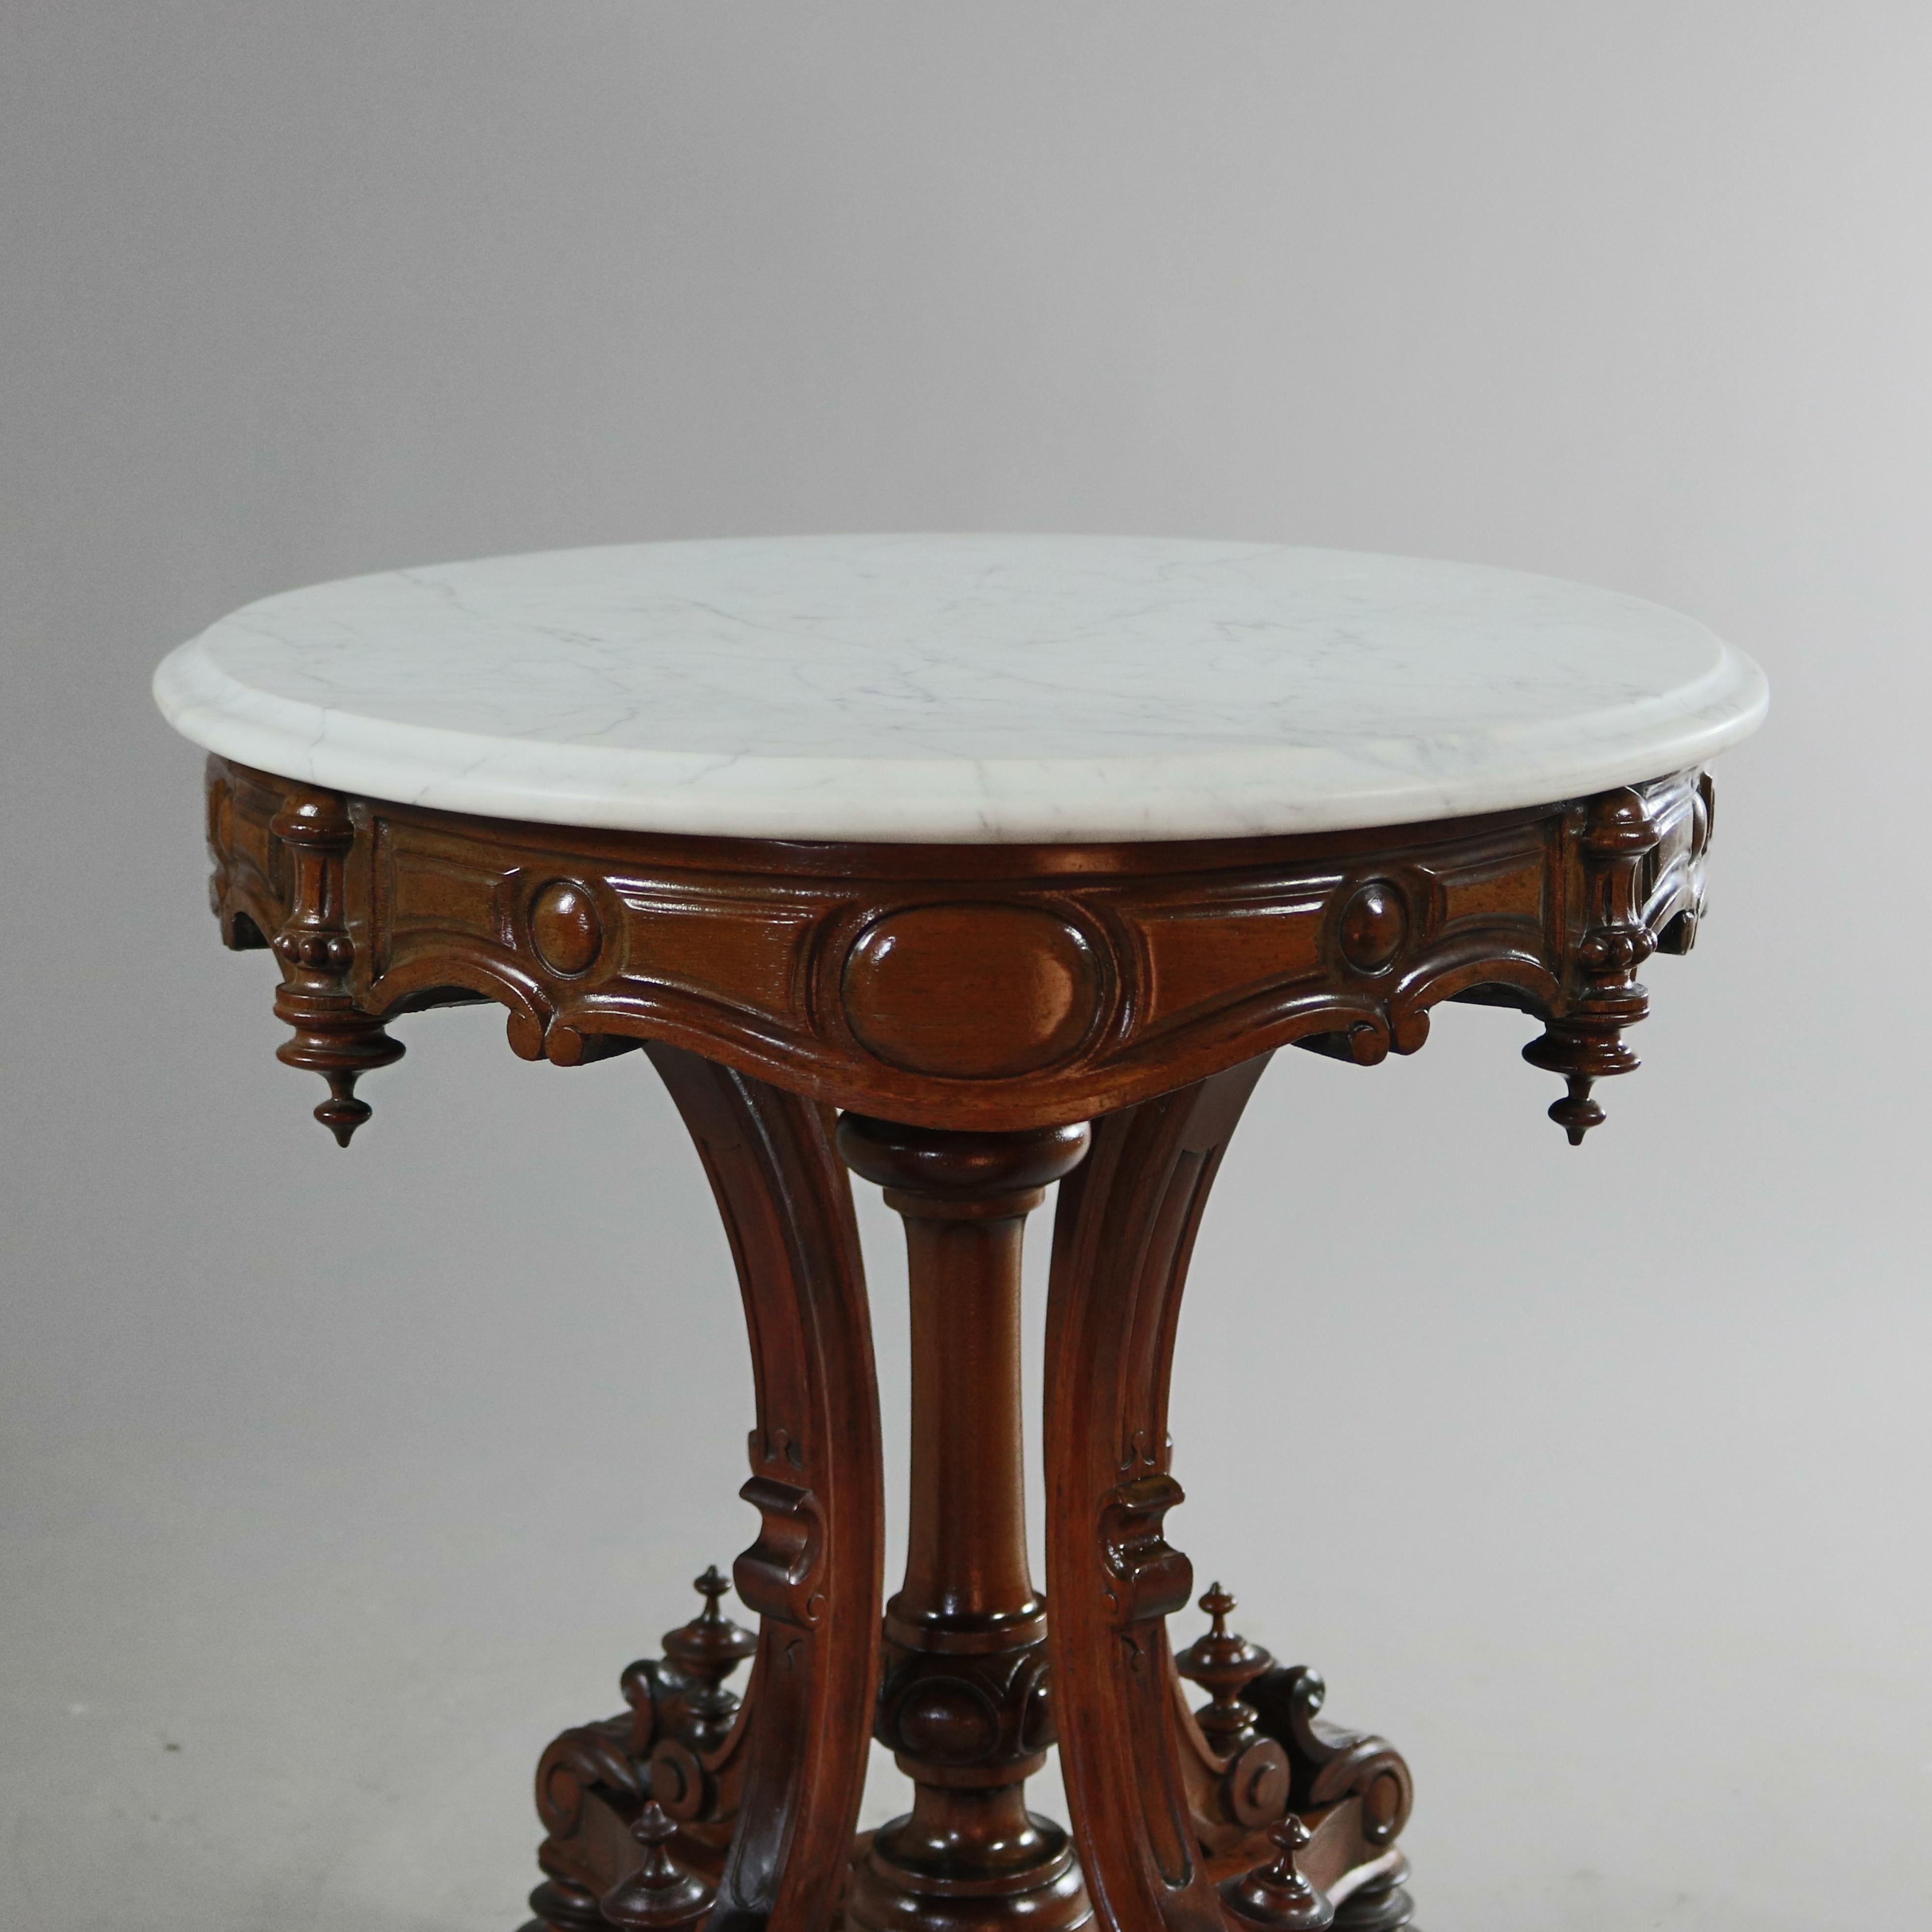 An antique Renaissance Revival center table offers bevelled marble top surmounting carved walnut frame with shaped skirt having drop finials and raised on scroll form legs seated on base with scrolled feet, circa 1880.

Measures: 29.5